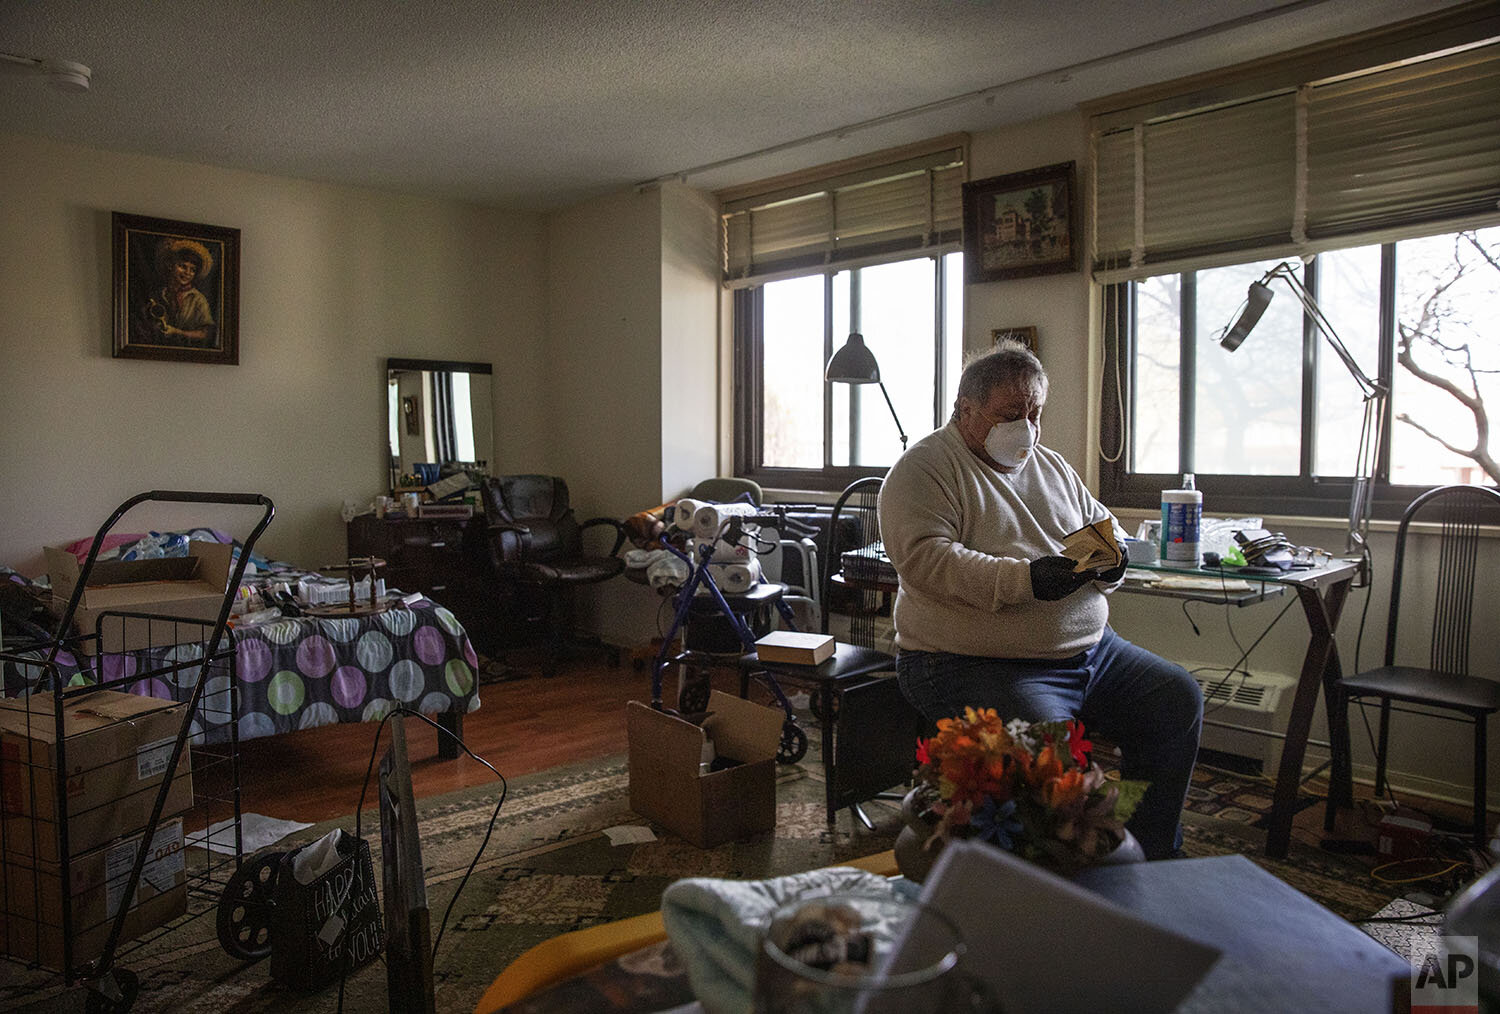  Michael Tokar packs up the apartment of his father, David Tokar, after he died from complications from coronavirus, in the Brooklyn borough of New York, Sunday, April 12, 2020. "I miss him. I like to call him sometimes. Ask him what you need, what y